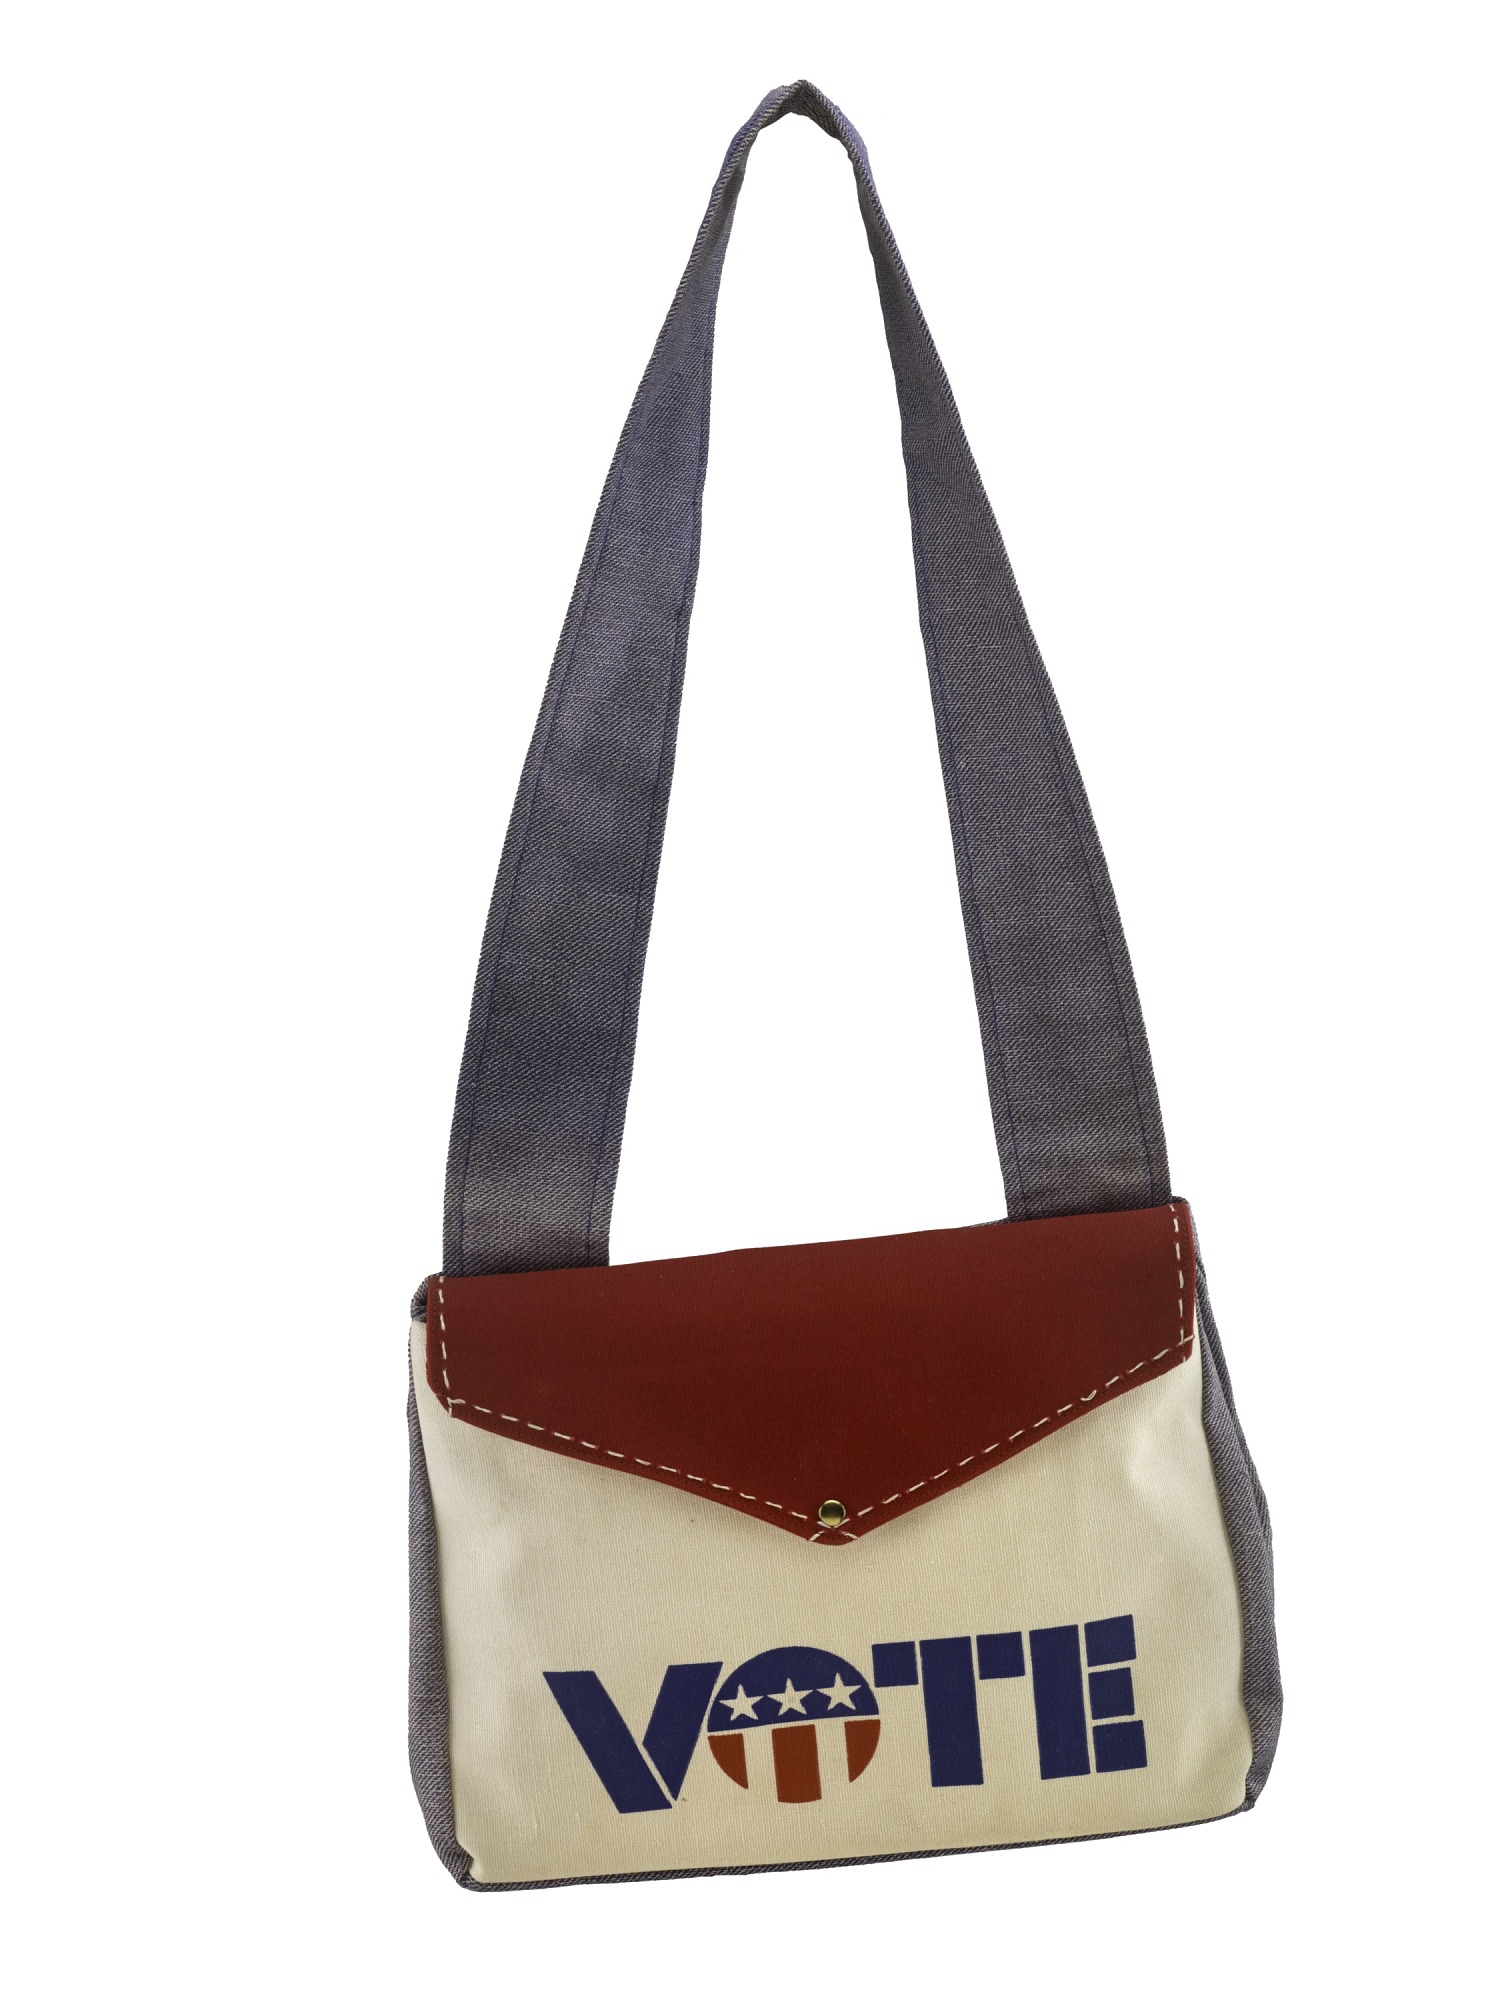 Gray and tan bag with a red flap. It has a red and blue design that says "vote."